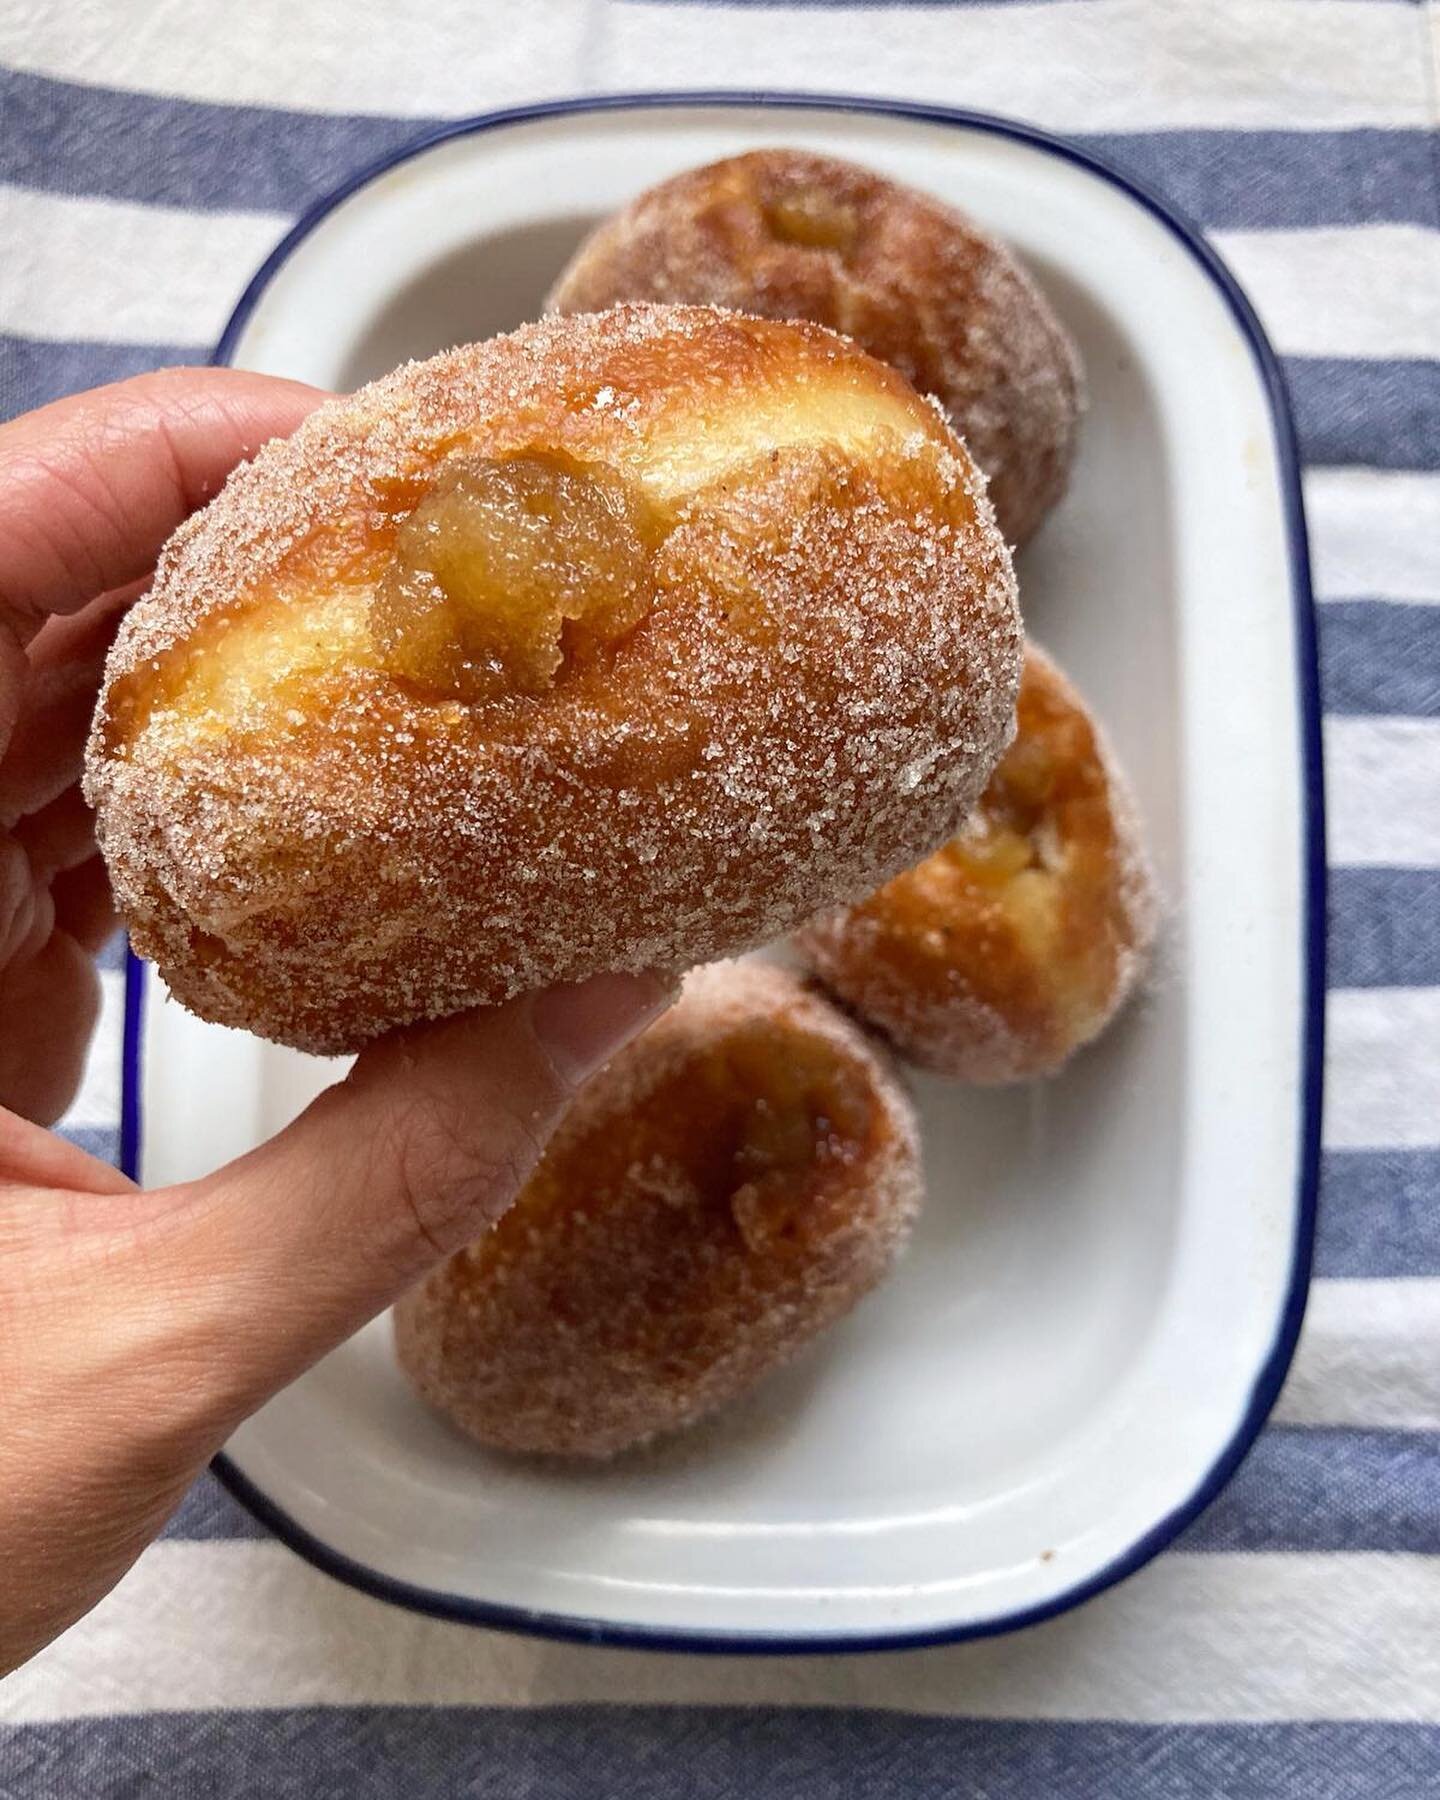 DOUGH WEEK had to involve doughnuts right!?? These Apple &amp; cinnamon beauties are served with creme anglais and a miso caramel dipping sauce. Get involved!! #puffschool